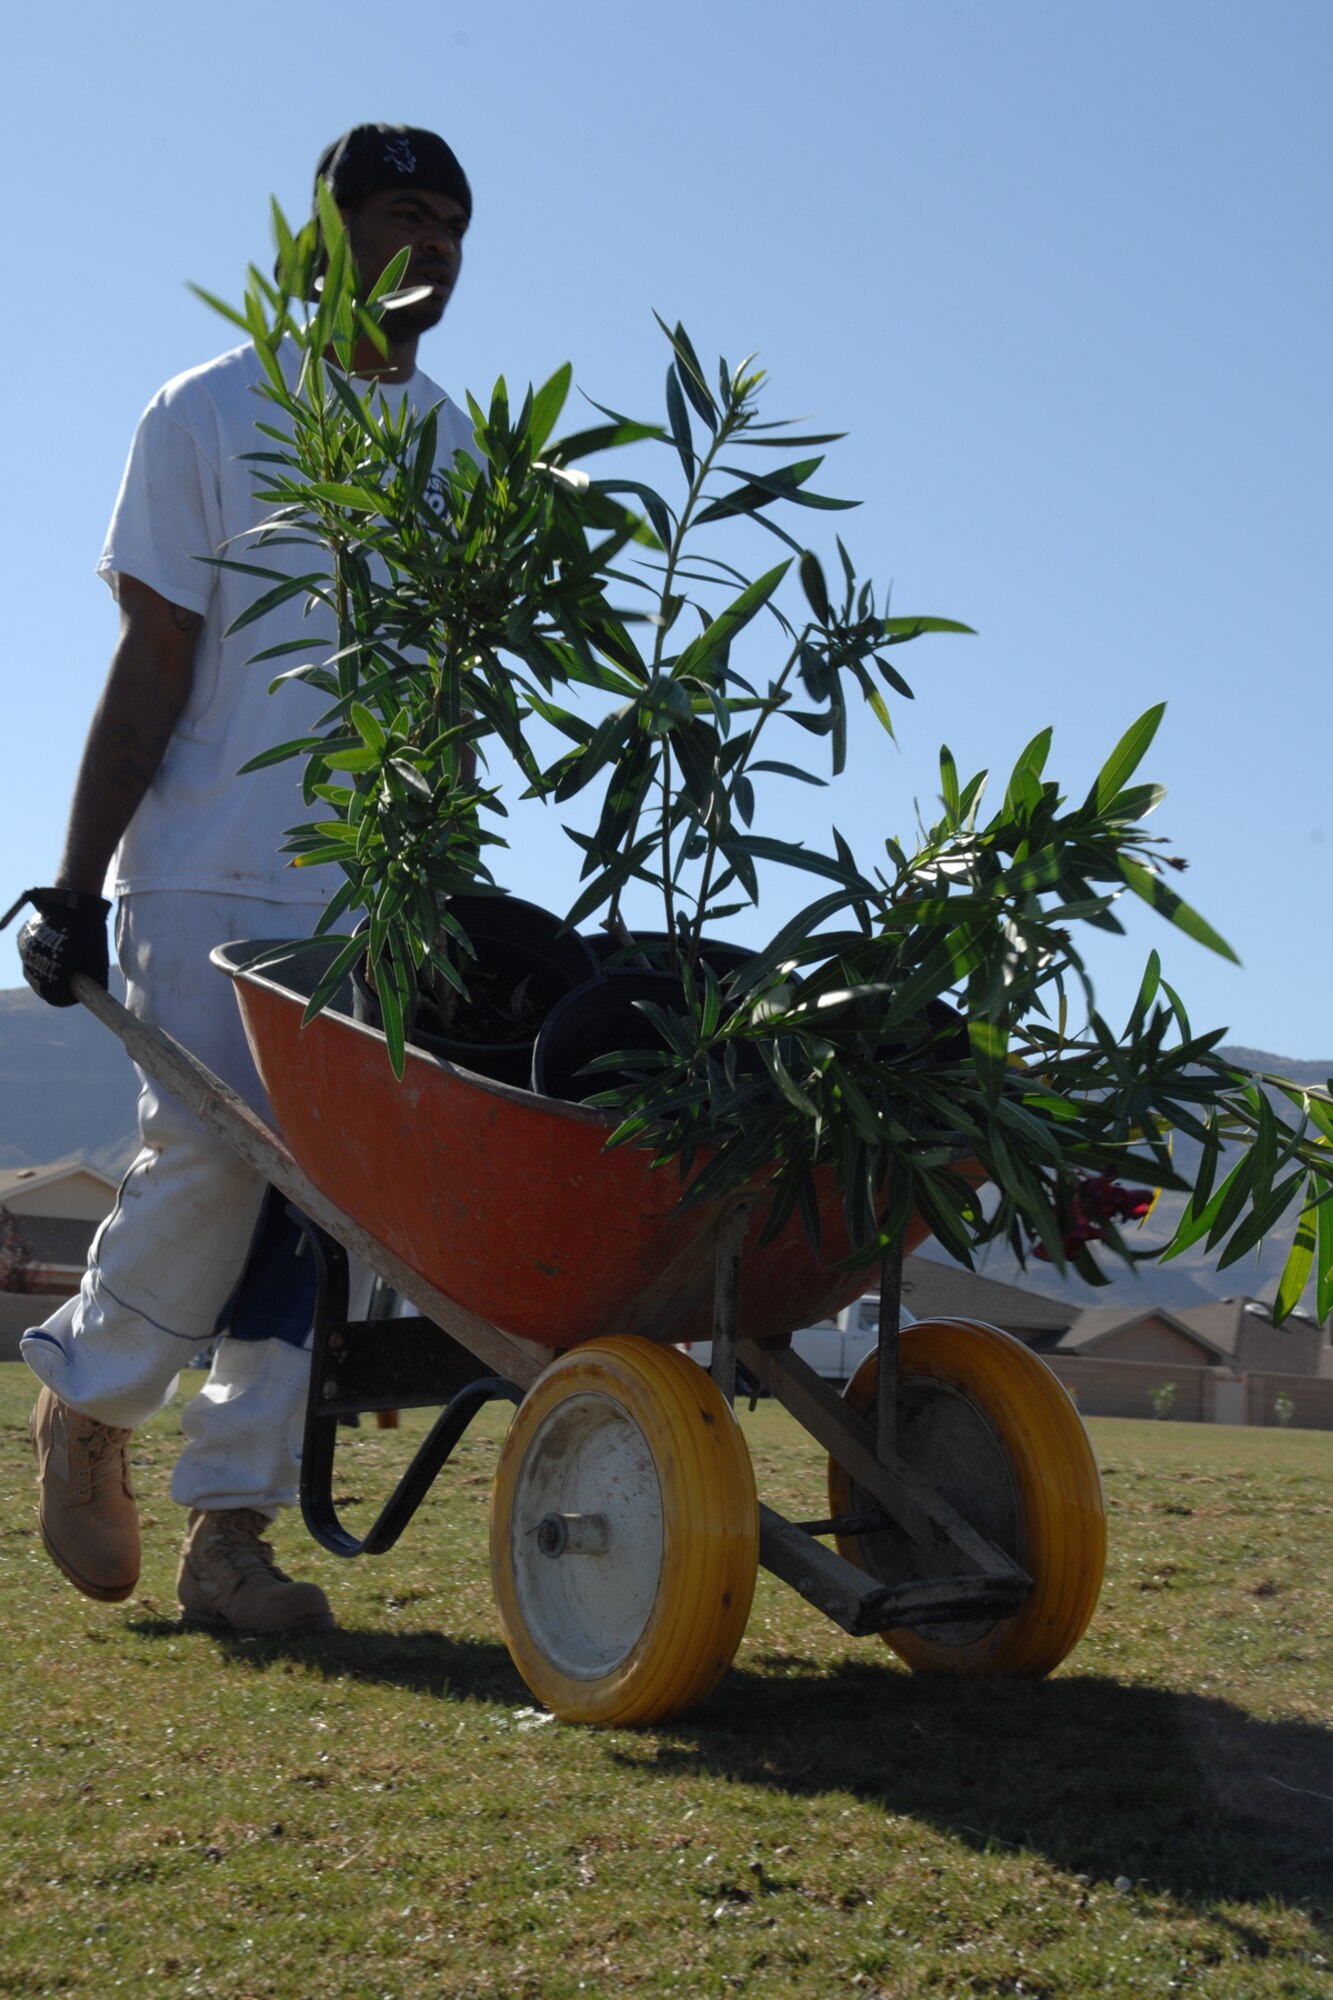 Senior Airman Calvin Washington, 49th Aircraft Maintenance Squadron, carries a wheel barrel of shrubs to planted at Tierra De Suenos Park May 6 in Alamogordo, N.M. Airman Washington, along with other members of the 49th Maintenance Group, has volunteered to do work in the city as part of the Personnel Improvement Program, a project designed to keep Holloman Air Force Base personnel constructive while awaiting the arrival of the F-22A Raptor. (U.S. Air Force photo/Airman 1st Class Jamal D. Sutter)